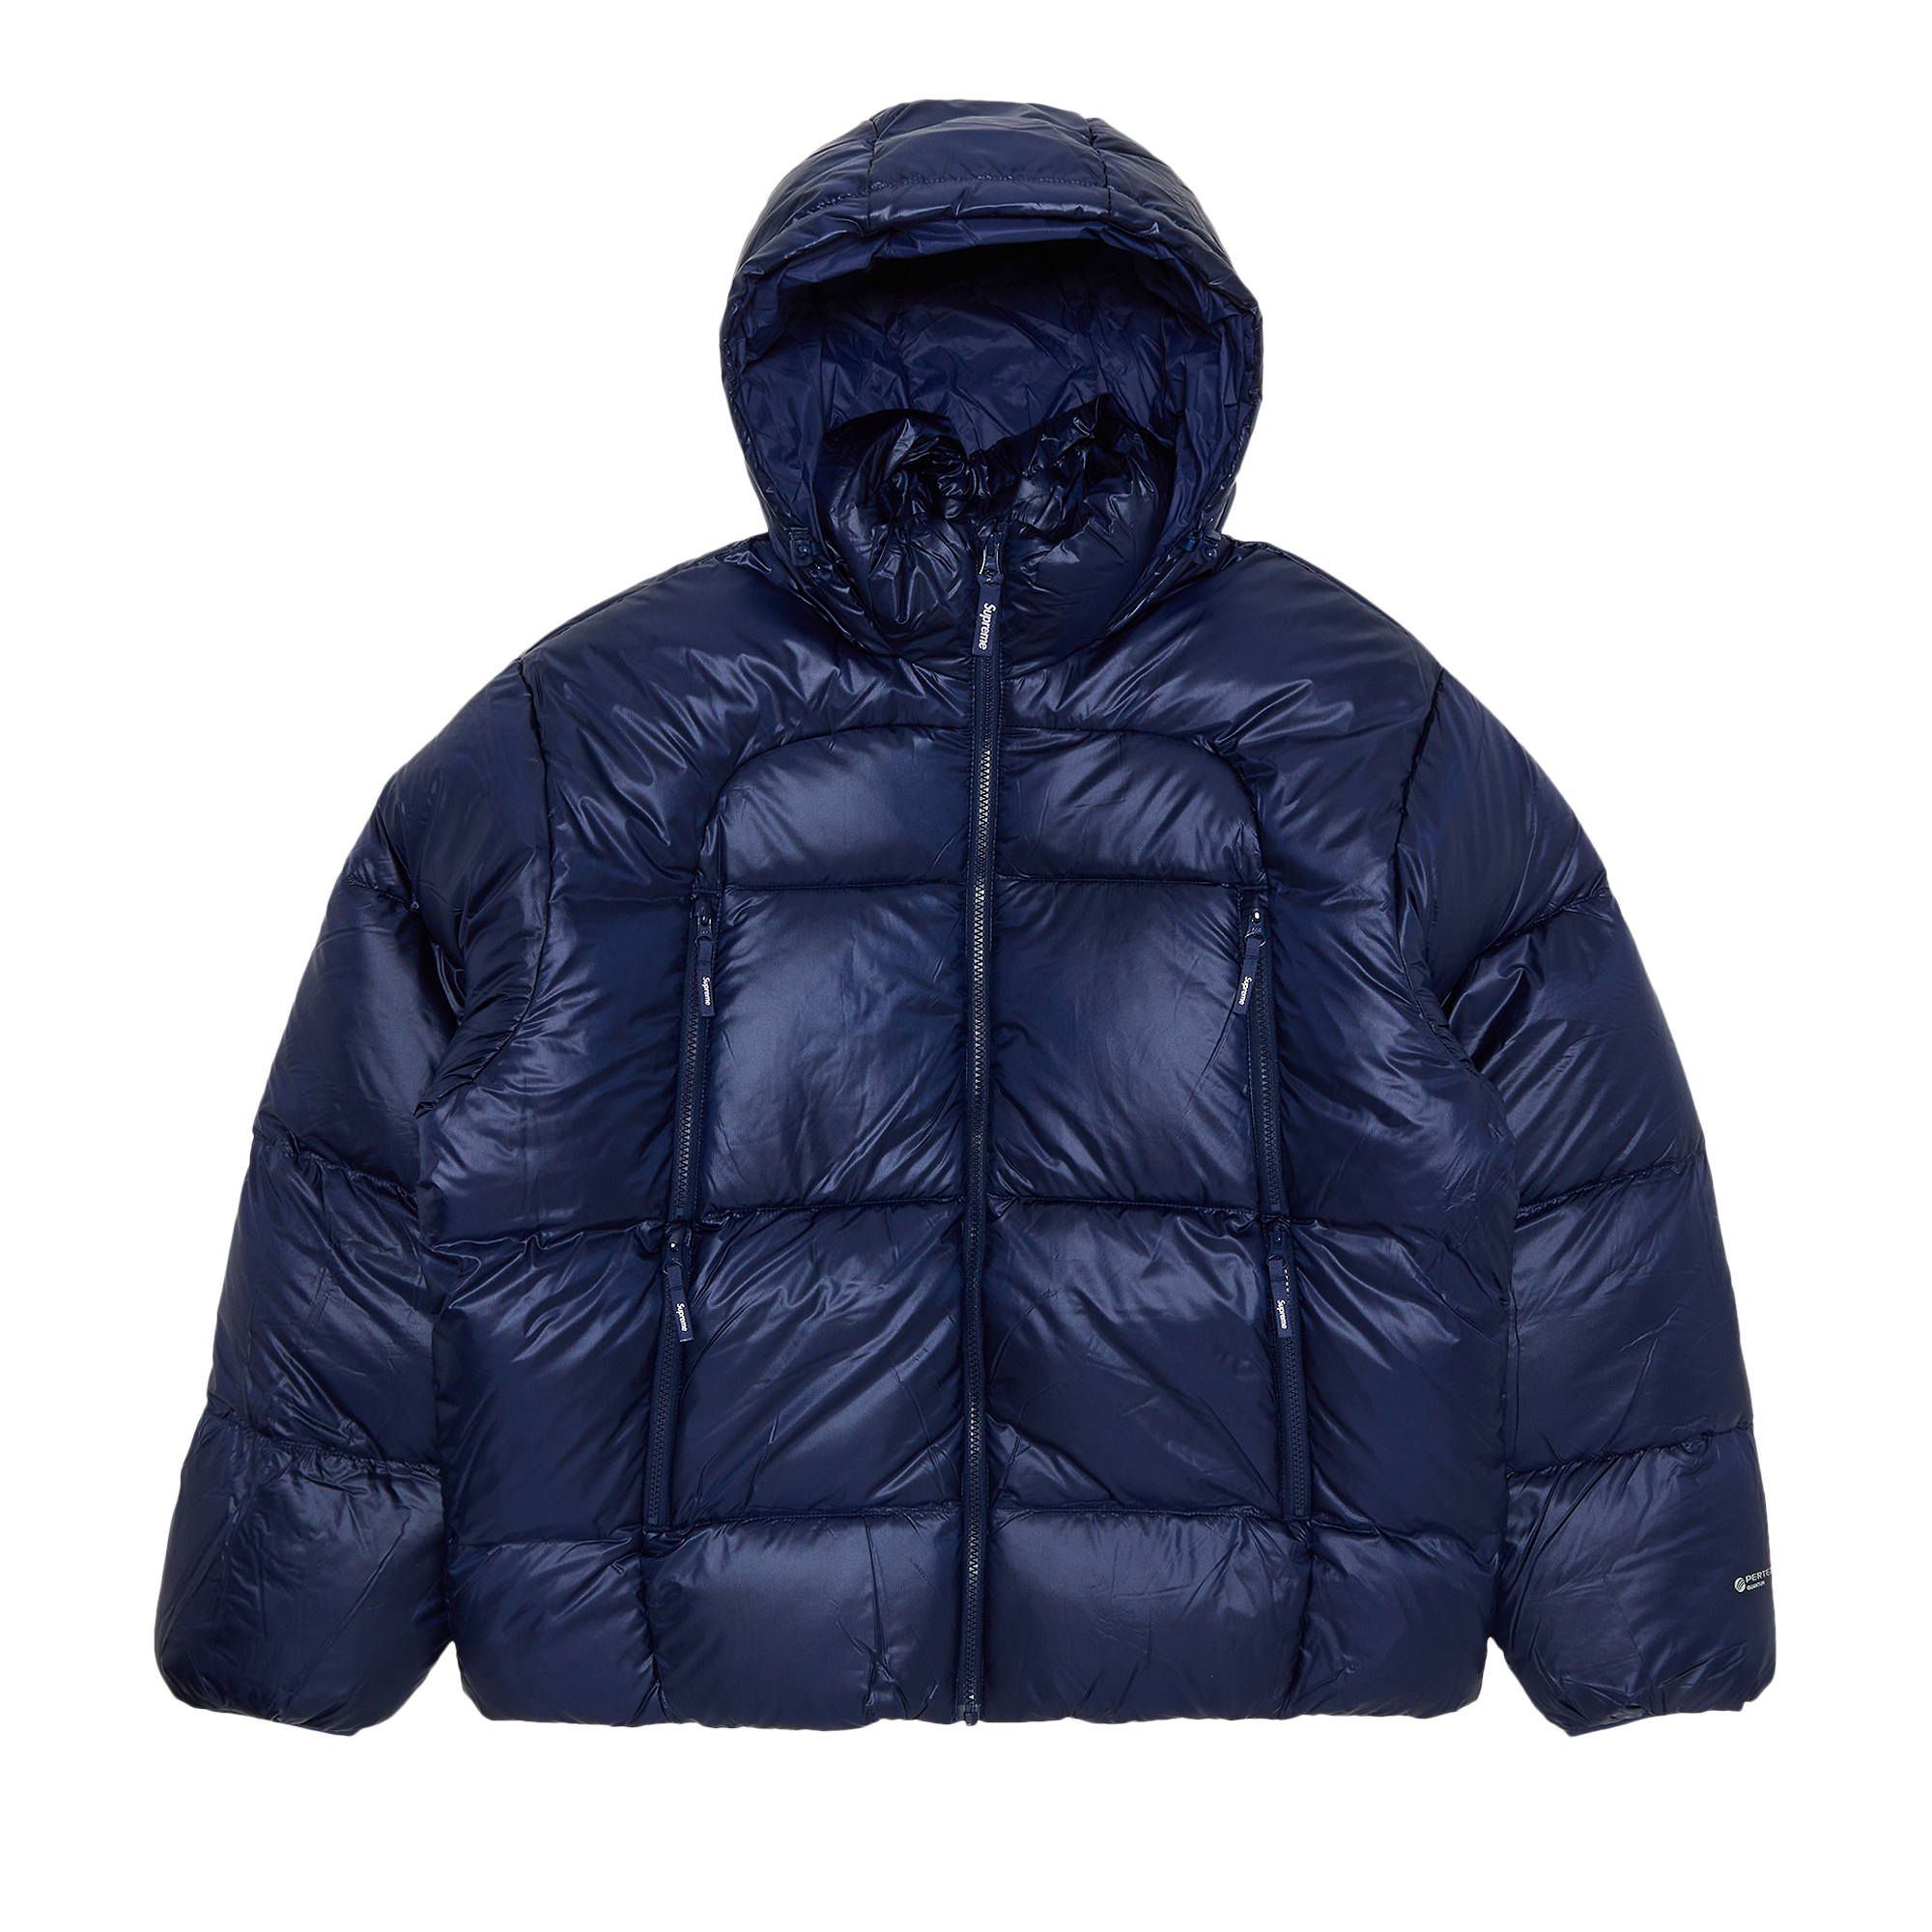 Supreme Hooded Down Down Jacket Fluorescent Blue